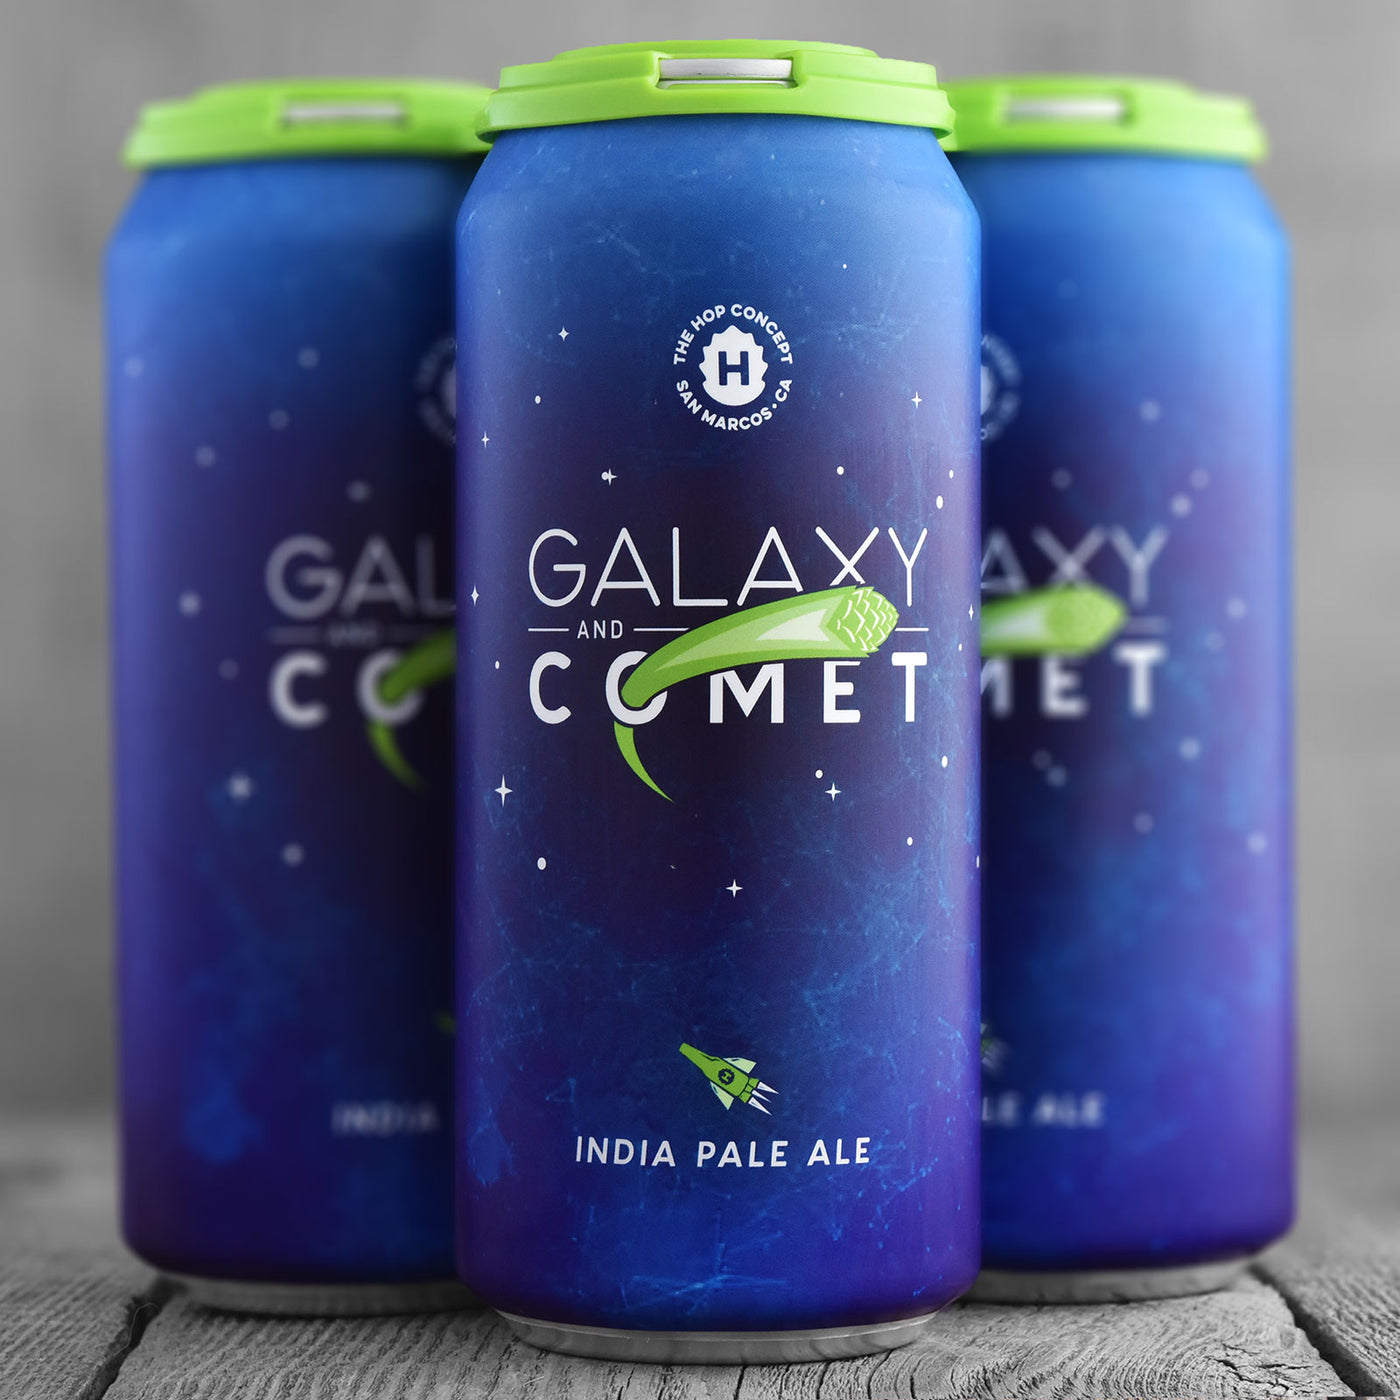 The Hop Concept Galaxy and Comet